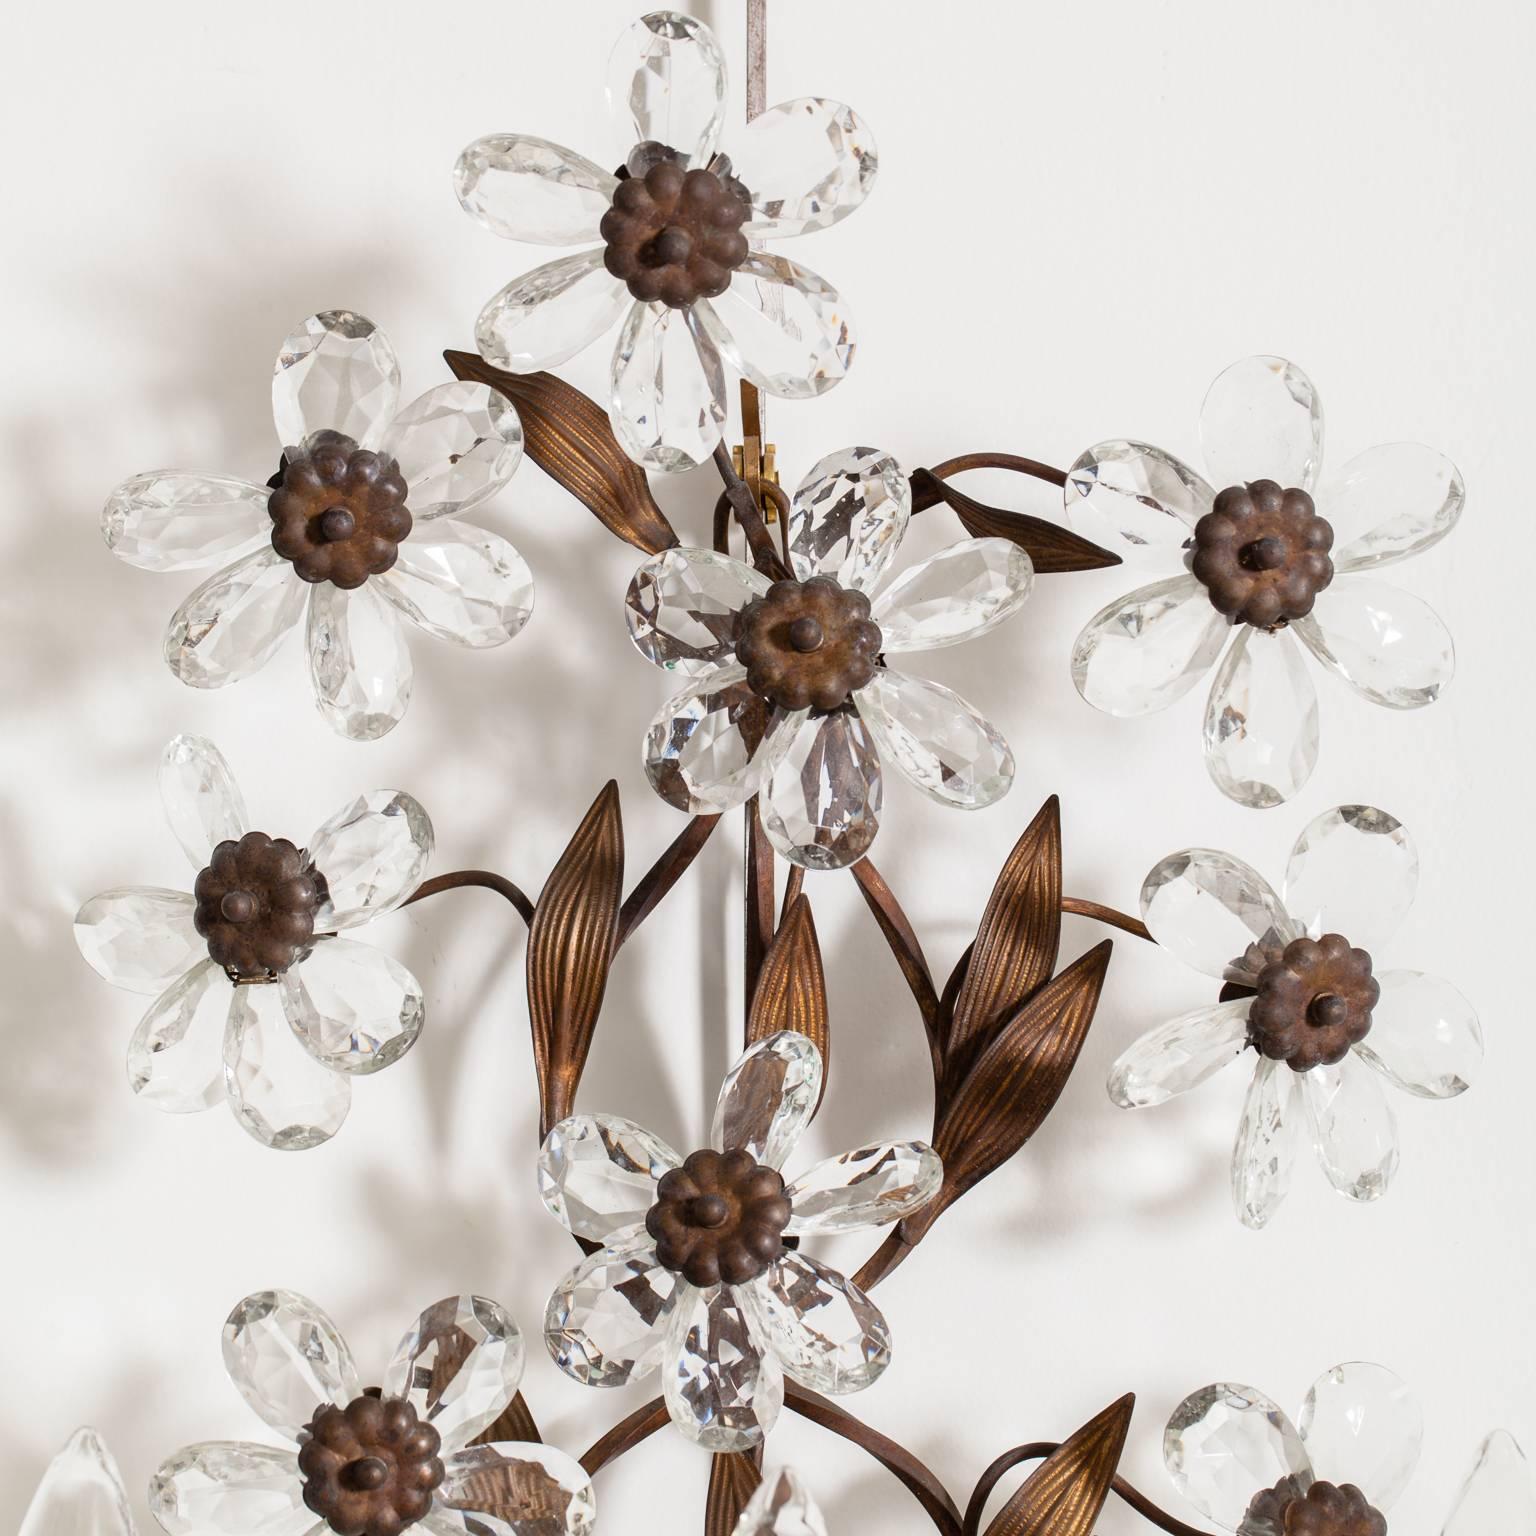 This pair of French crystal flower and brass sconces date from the early 20th century. The flower crystals sit in three tiers and are surrounded by brass leaves in perfect proportion. Each sconce has three lights, newly electrified.

Measures: 22